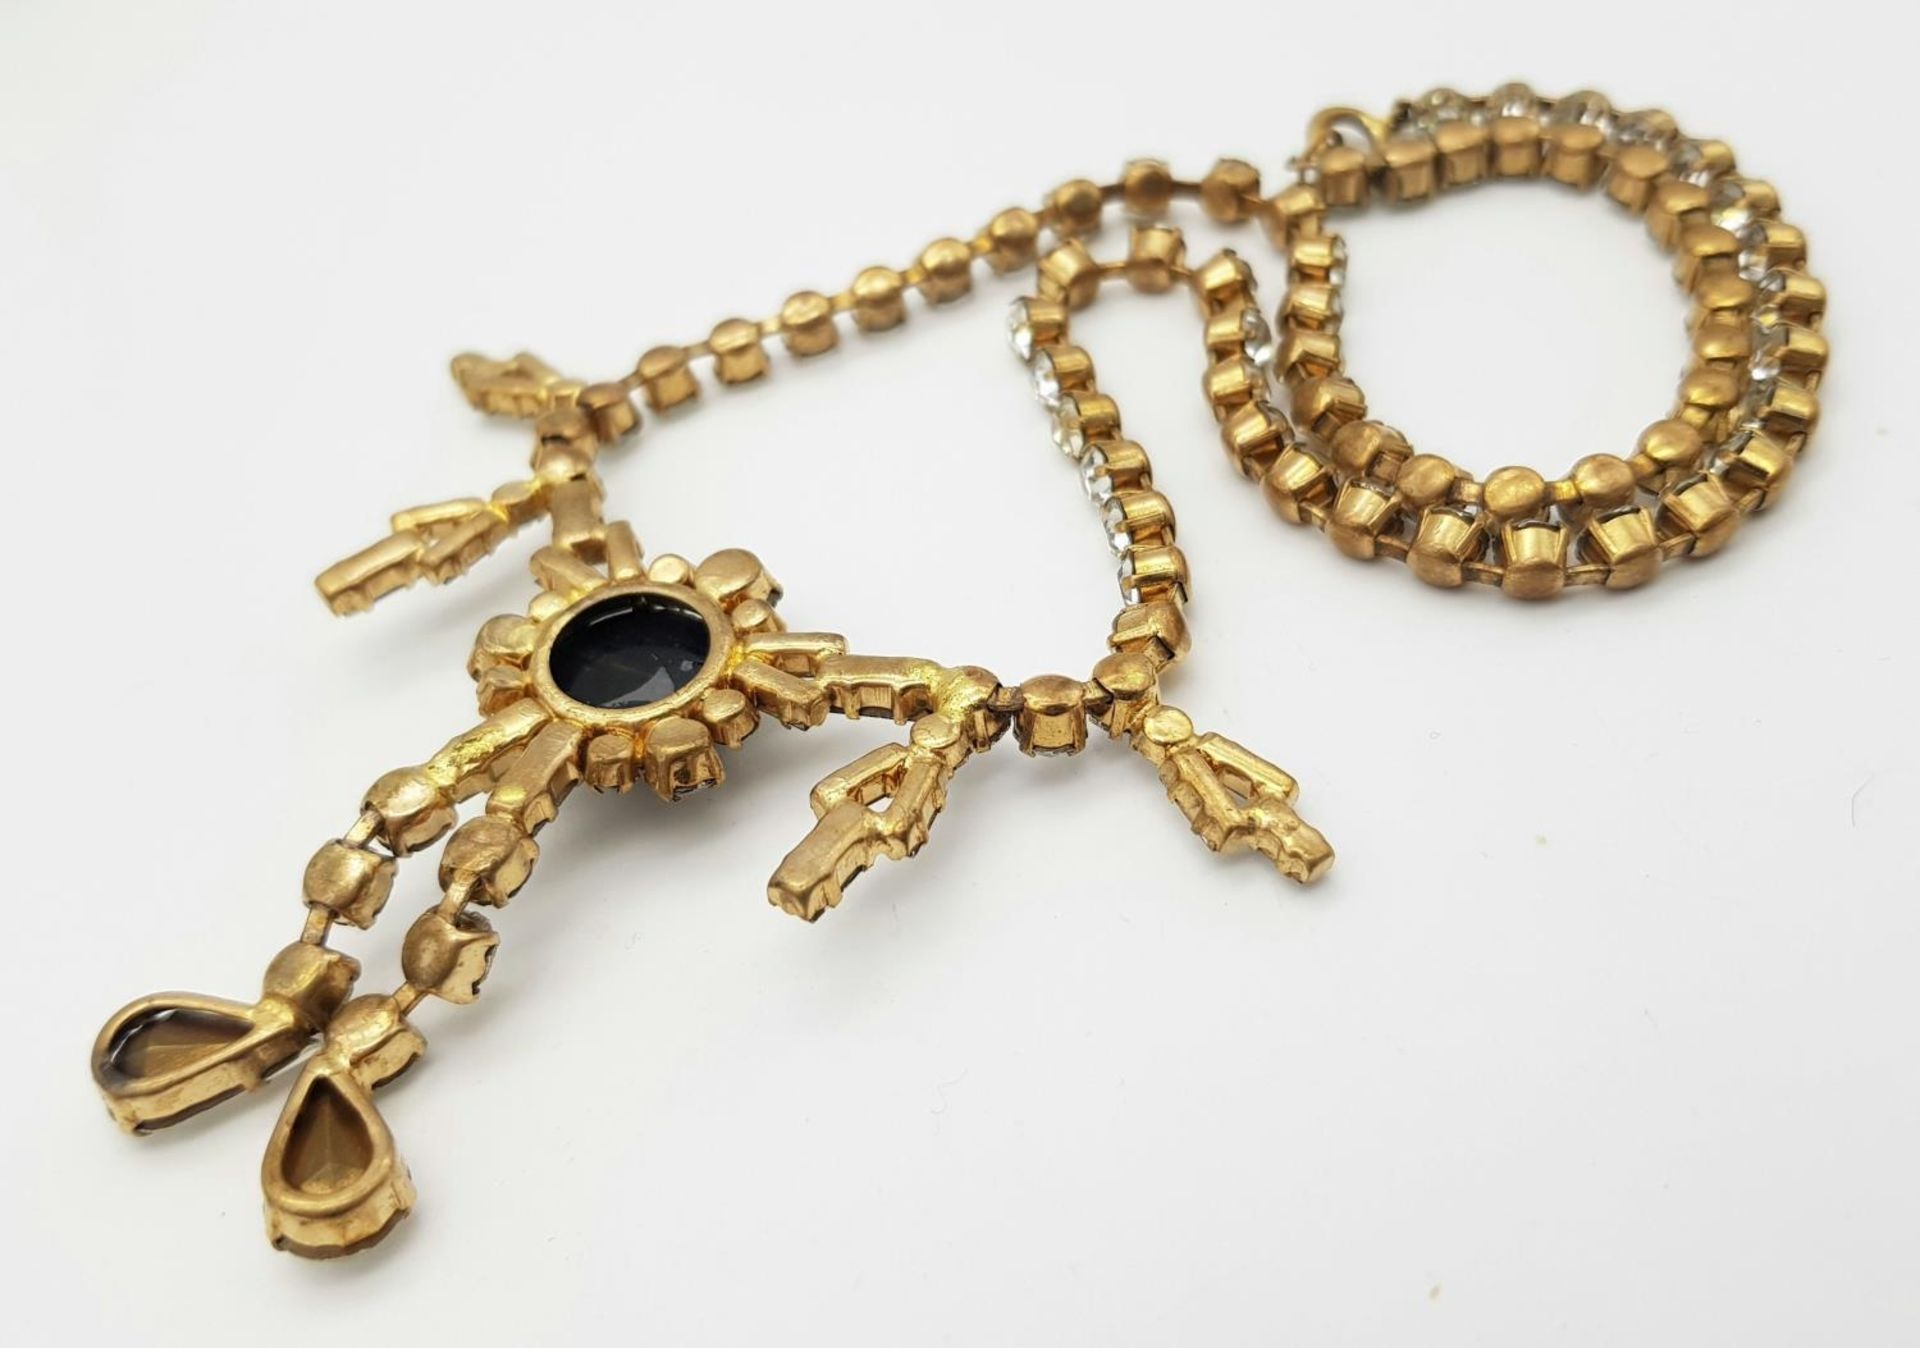 A Very Attractive Vintage Gold Tone Stone Set Cocktail/ Dress Statement Necklace. 45cm Length. - Image 5 of 6